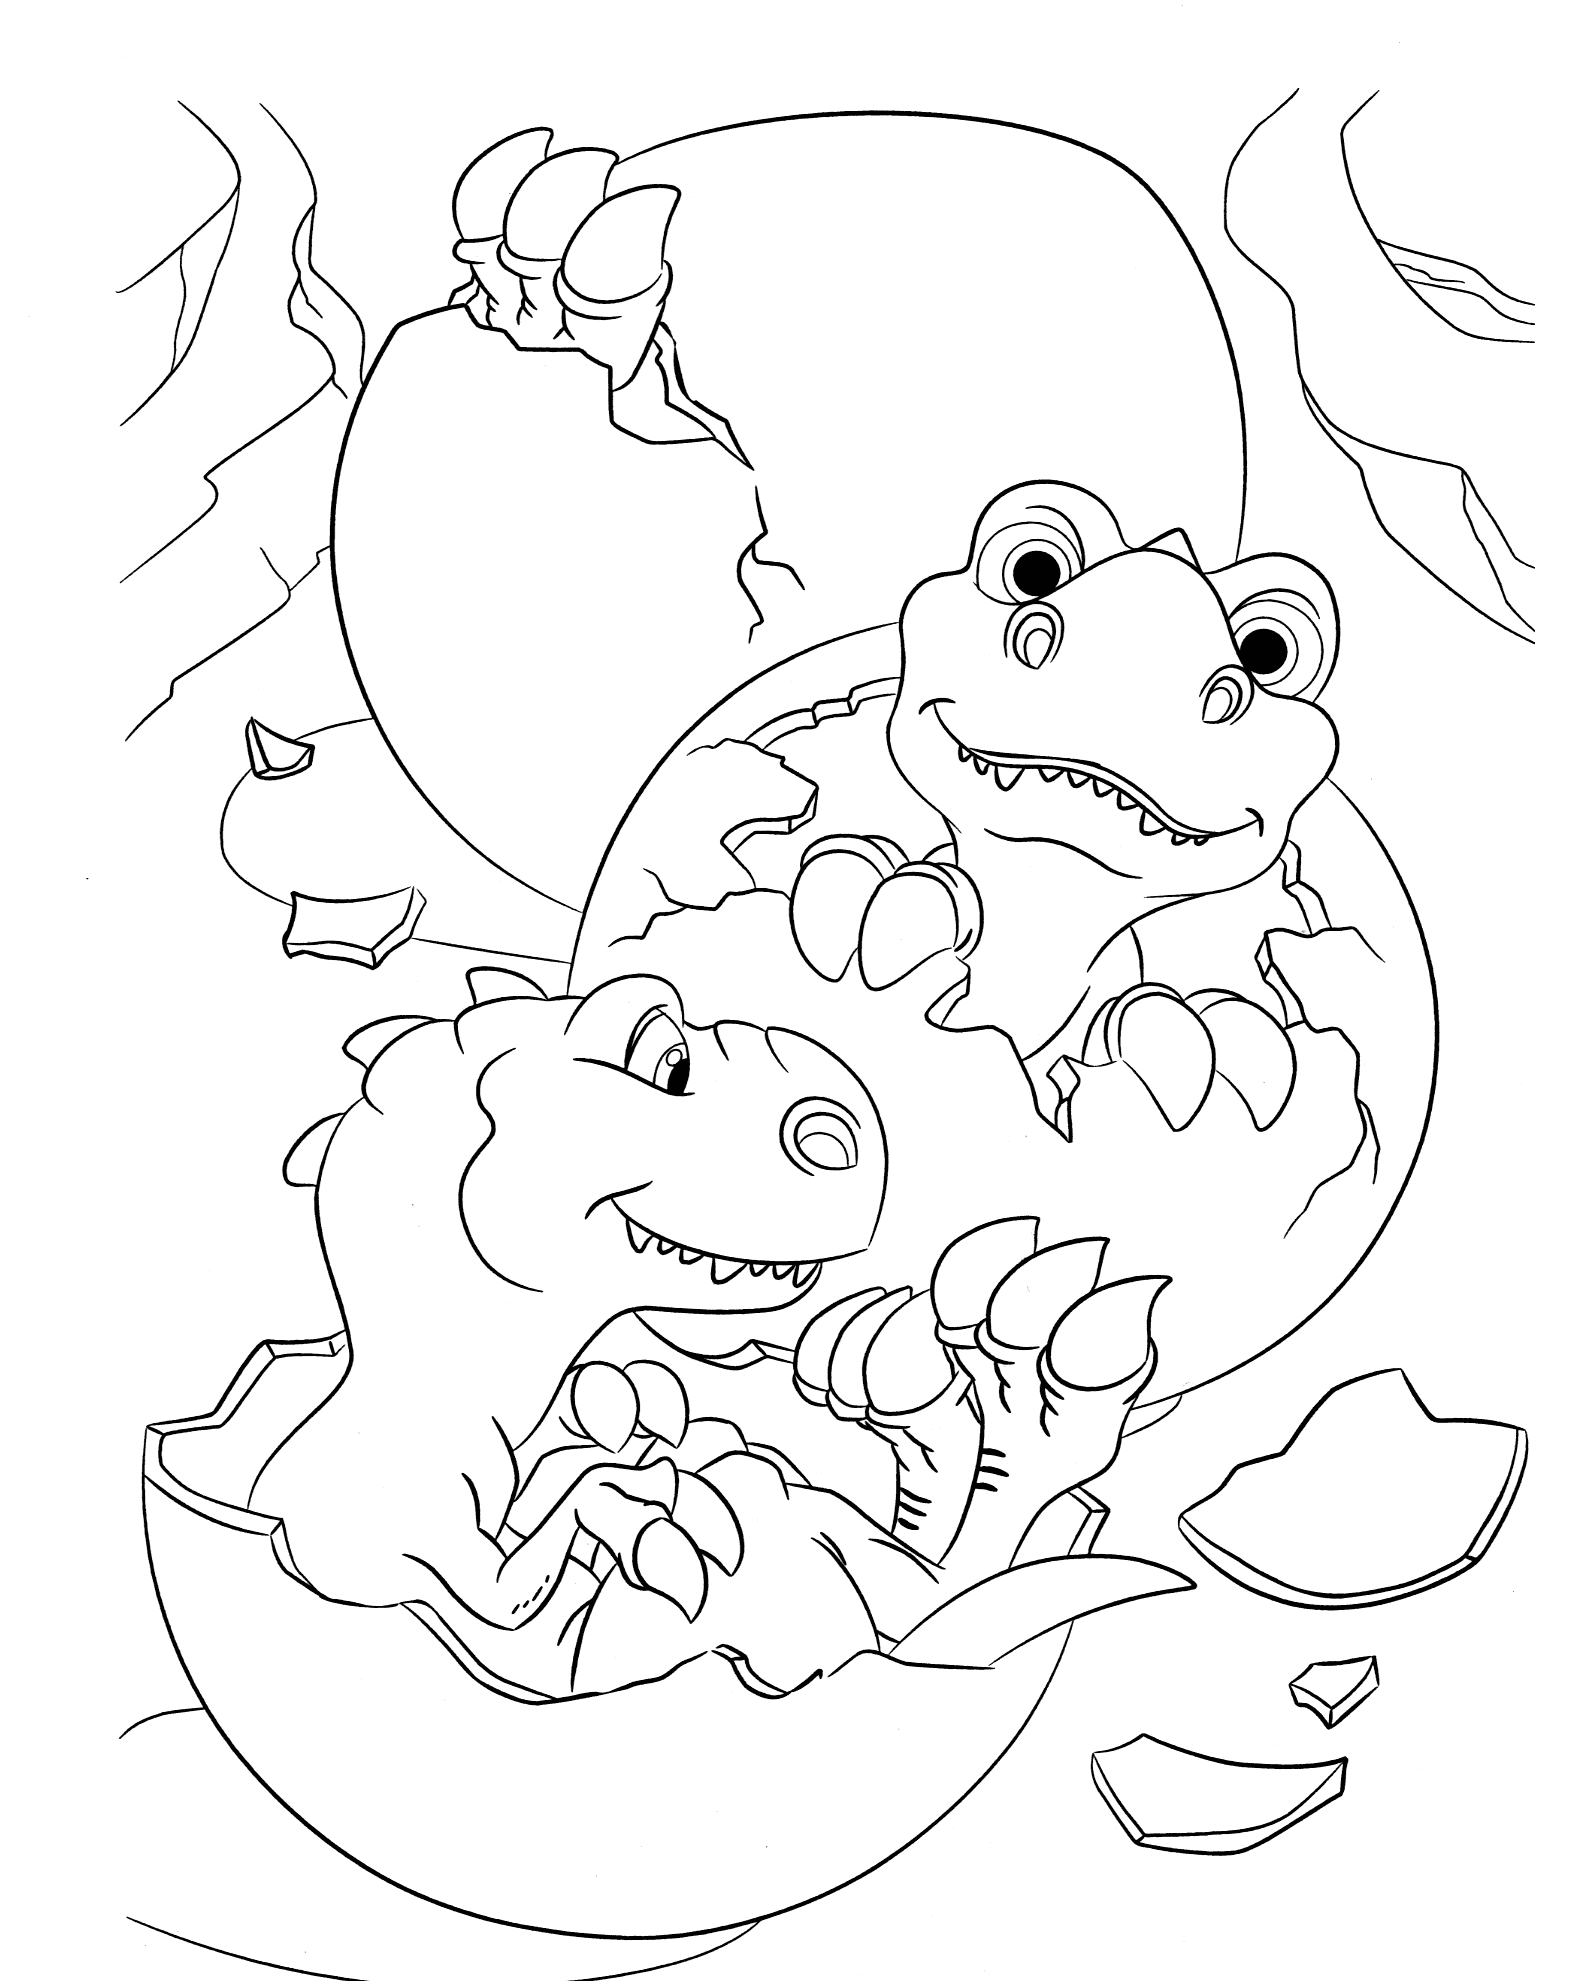 ice age 5 coloring pages | Impress Your Kids